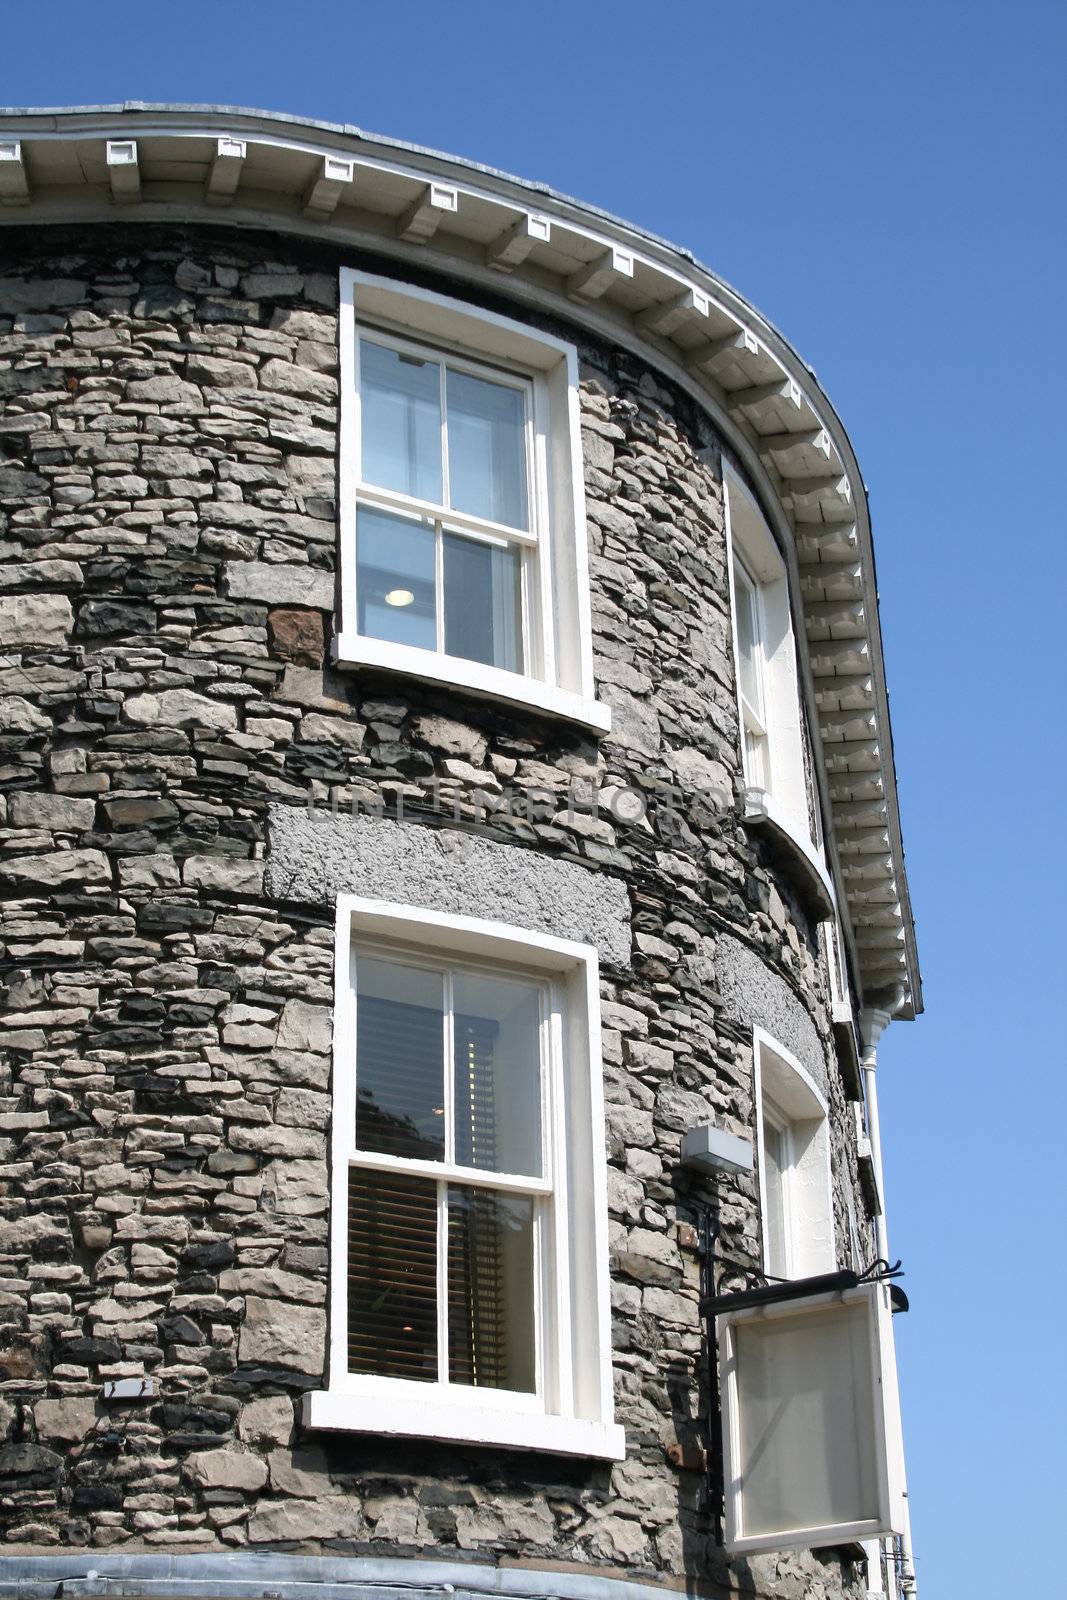 old architure detail showing windows against a blue sky